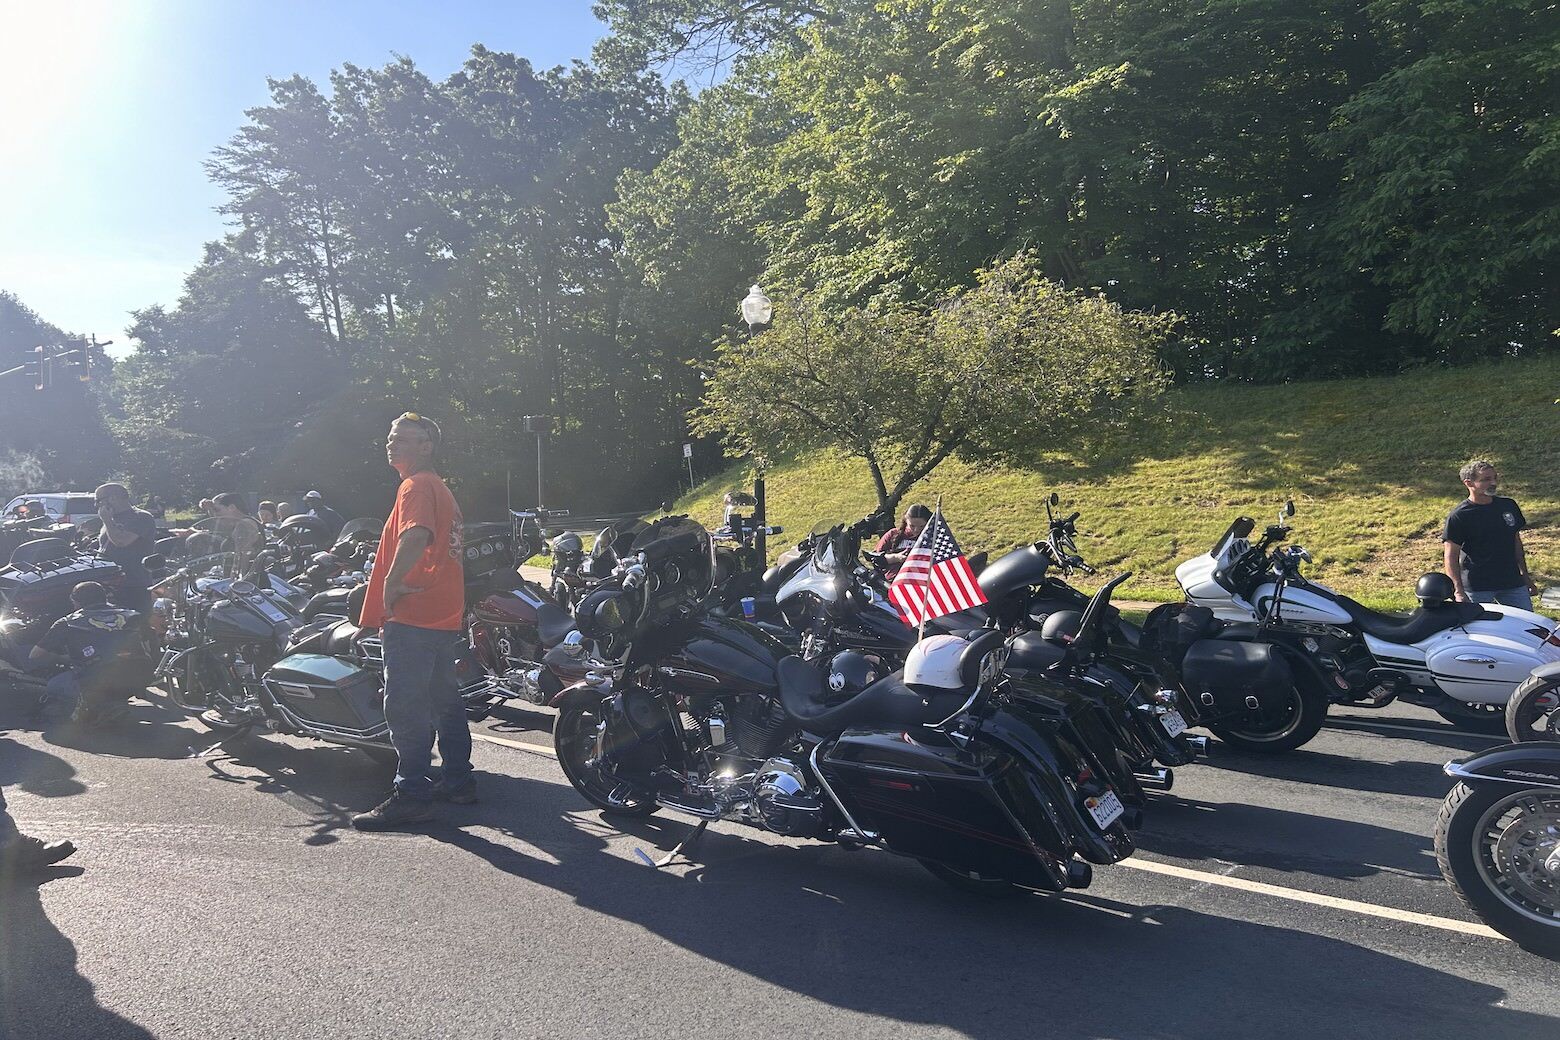 <p>Tom Kreutzer’s uncle was killed in World War II. He’s an employee with the Department of State and has worked with military commands in the past. He said this ride is a small way to show his appreciation for the people who sacrifice their lives.</p>
<p>“There’s usually a really good community, especially with Harley riders,” Kreutzer said. “Generally, when I’ve been with Harley guys, they’re a certain kind of person and I respect that. So, they’re good to hang around with.”</p>
<p>John De Pasquale has been riding in the event for about 20 years. He said this year in particular is special for him because it’s the first year his son Mike is riding alongside. Mike, the grandson of a World War II veteran, says he’s most excited “to actually be in it, not standing on the side of the road waving at everybody.”</p>
